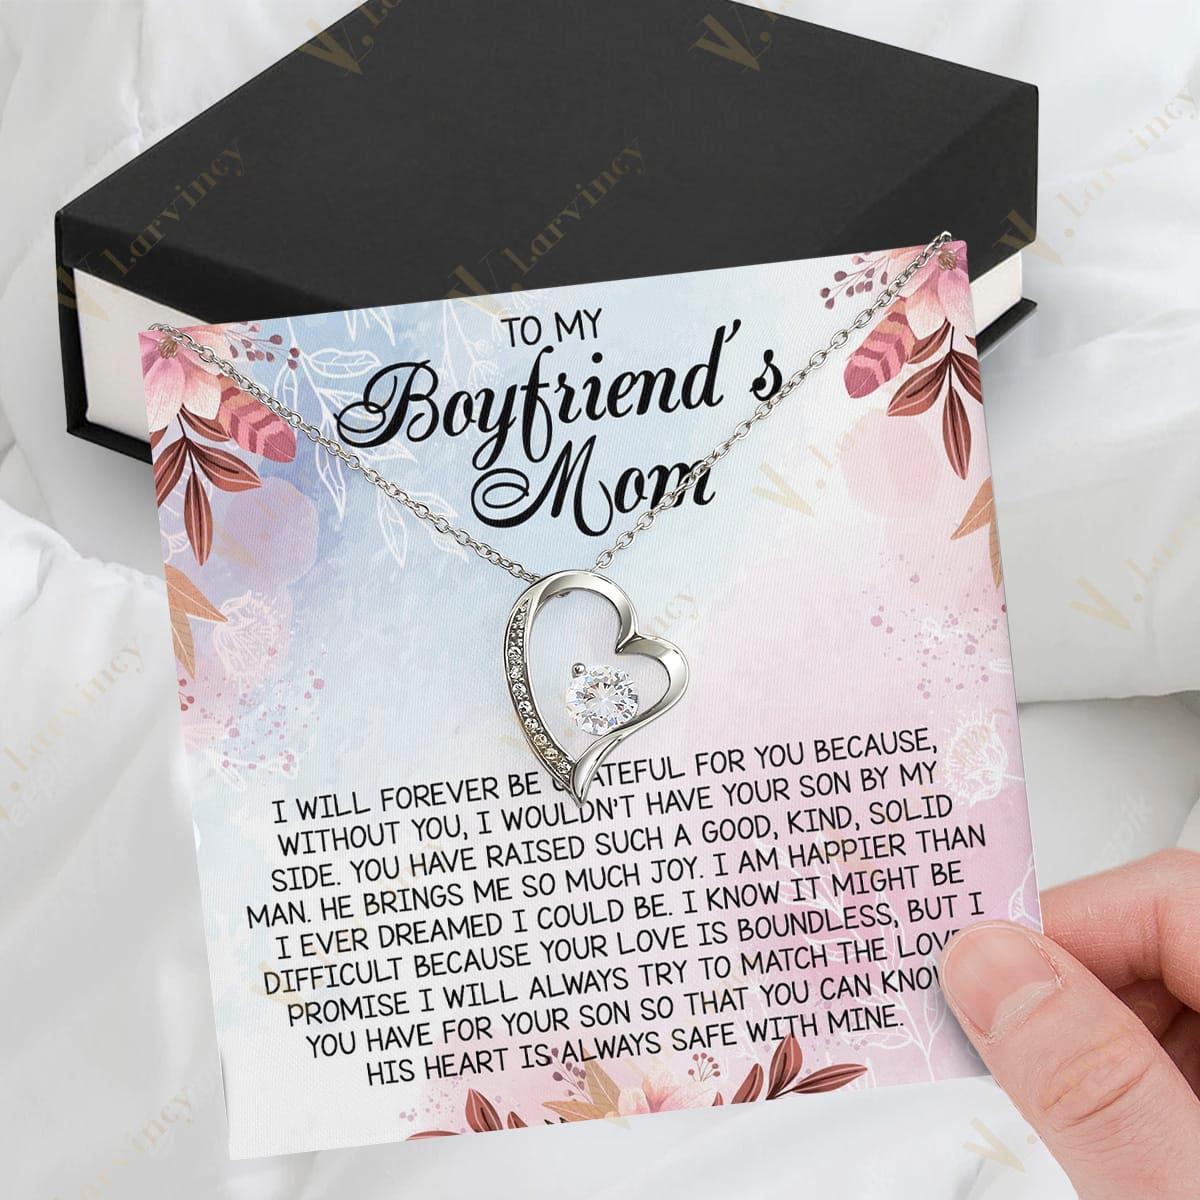 To My Boyfriend Mom Necklace, Jewelry Boyfriend's Mom Gifts, Boyfriends Mom Christmas Gifts From Girlfriend With Gift Box Personalized Message Card, Love Is Boundless - Larvincy Jewel